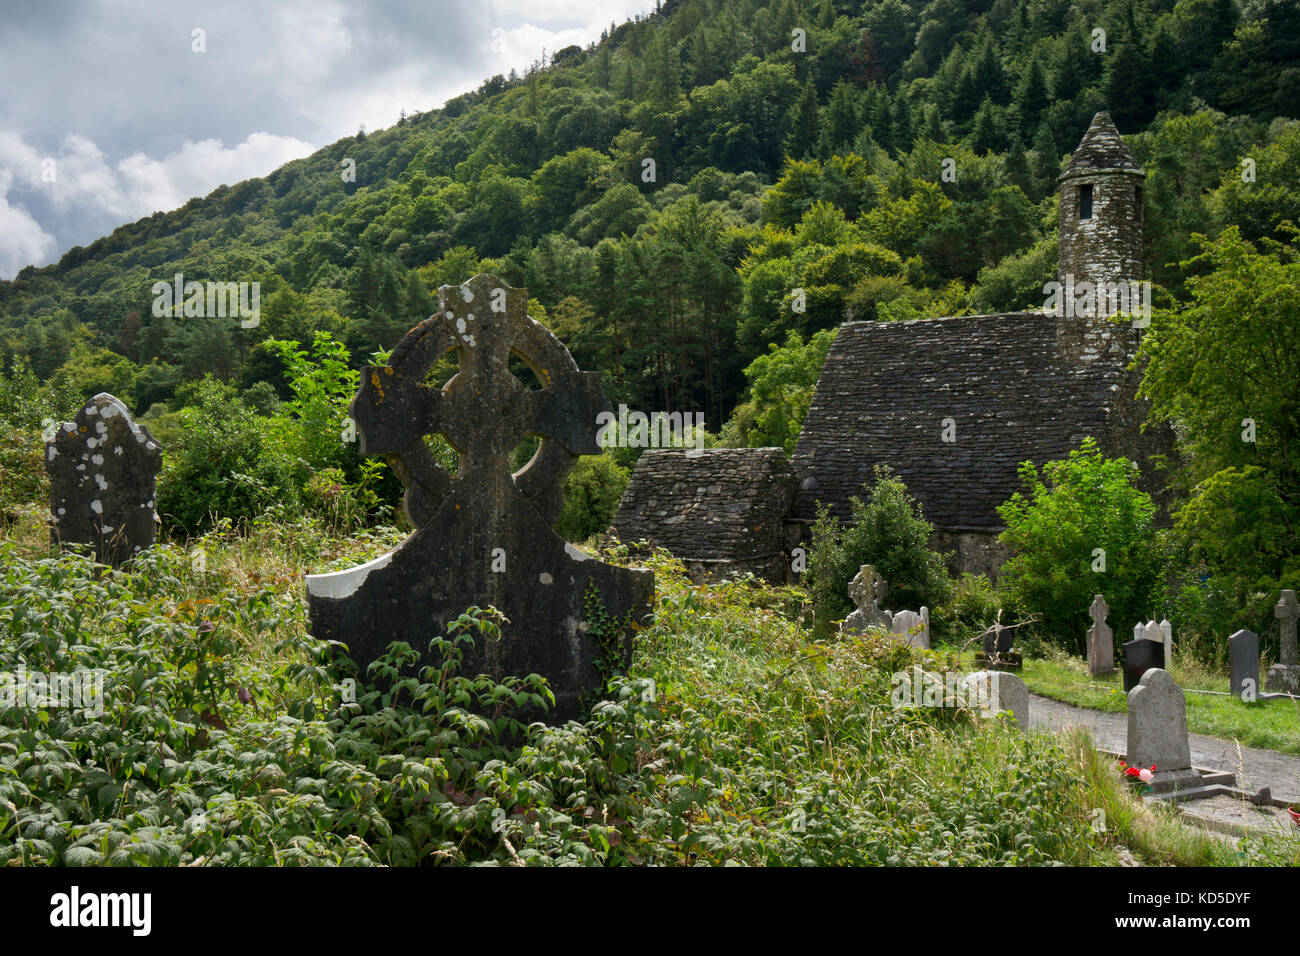 Stone ruins of old monastic settlement built in 6th century at Glendalough,county wicklow,ireland Stock Photo